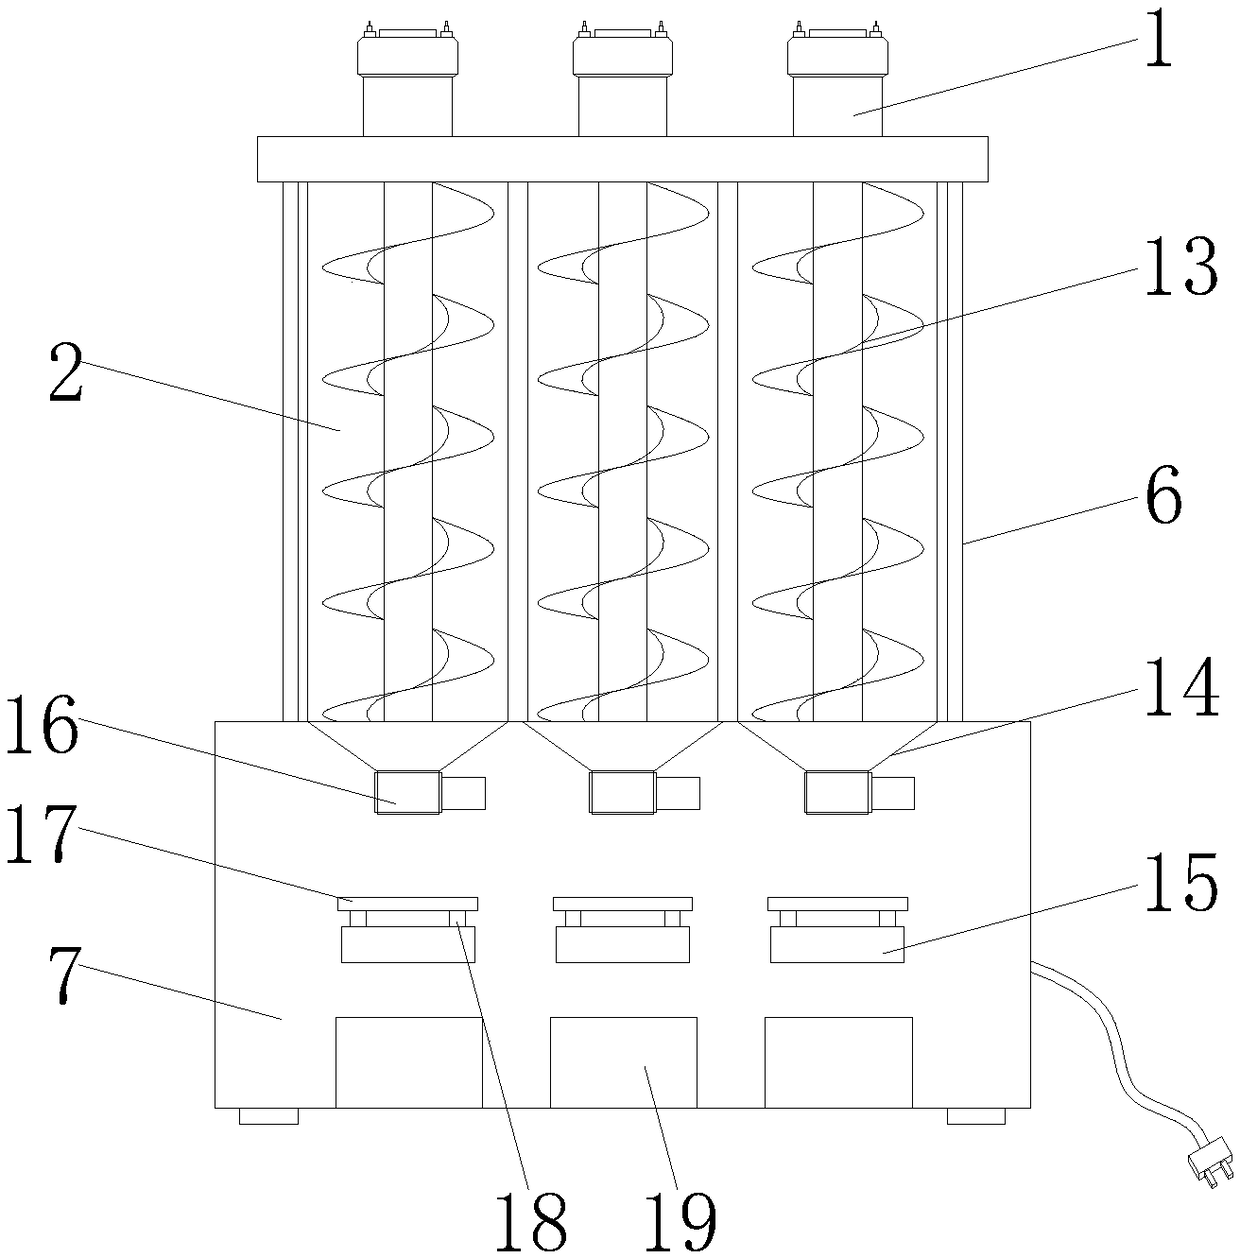 Chemical reagent metering, placement, taking and storage device